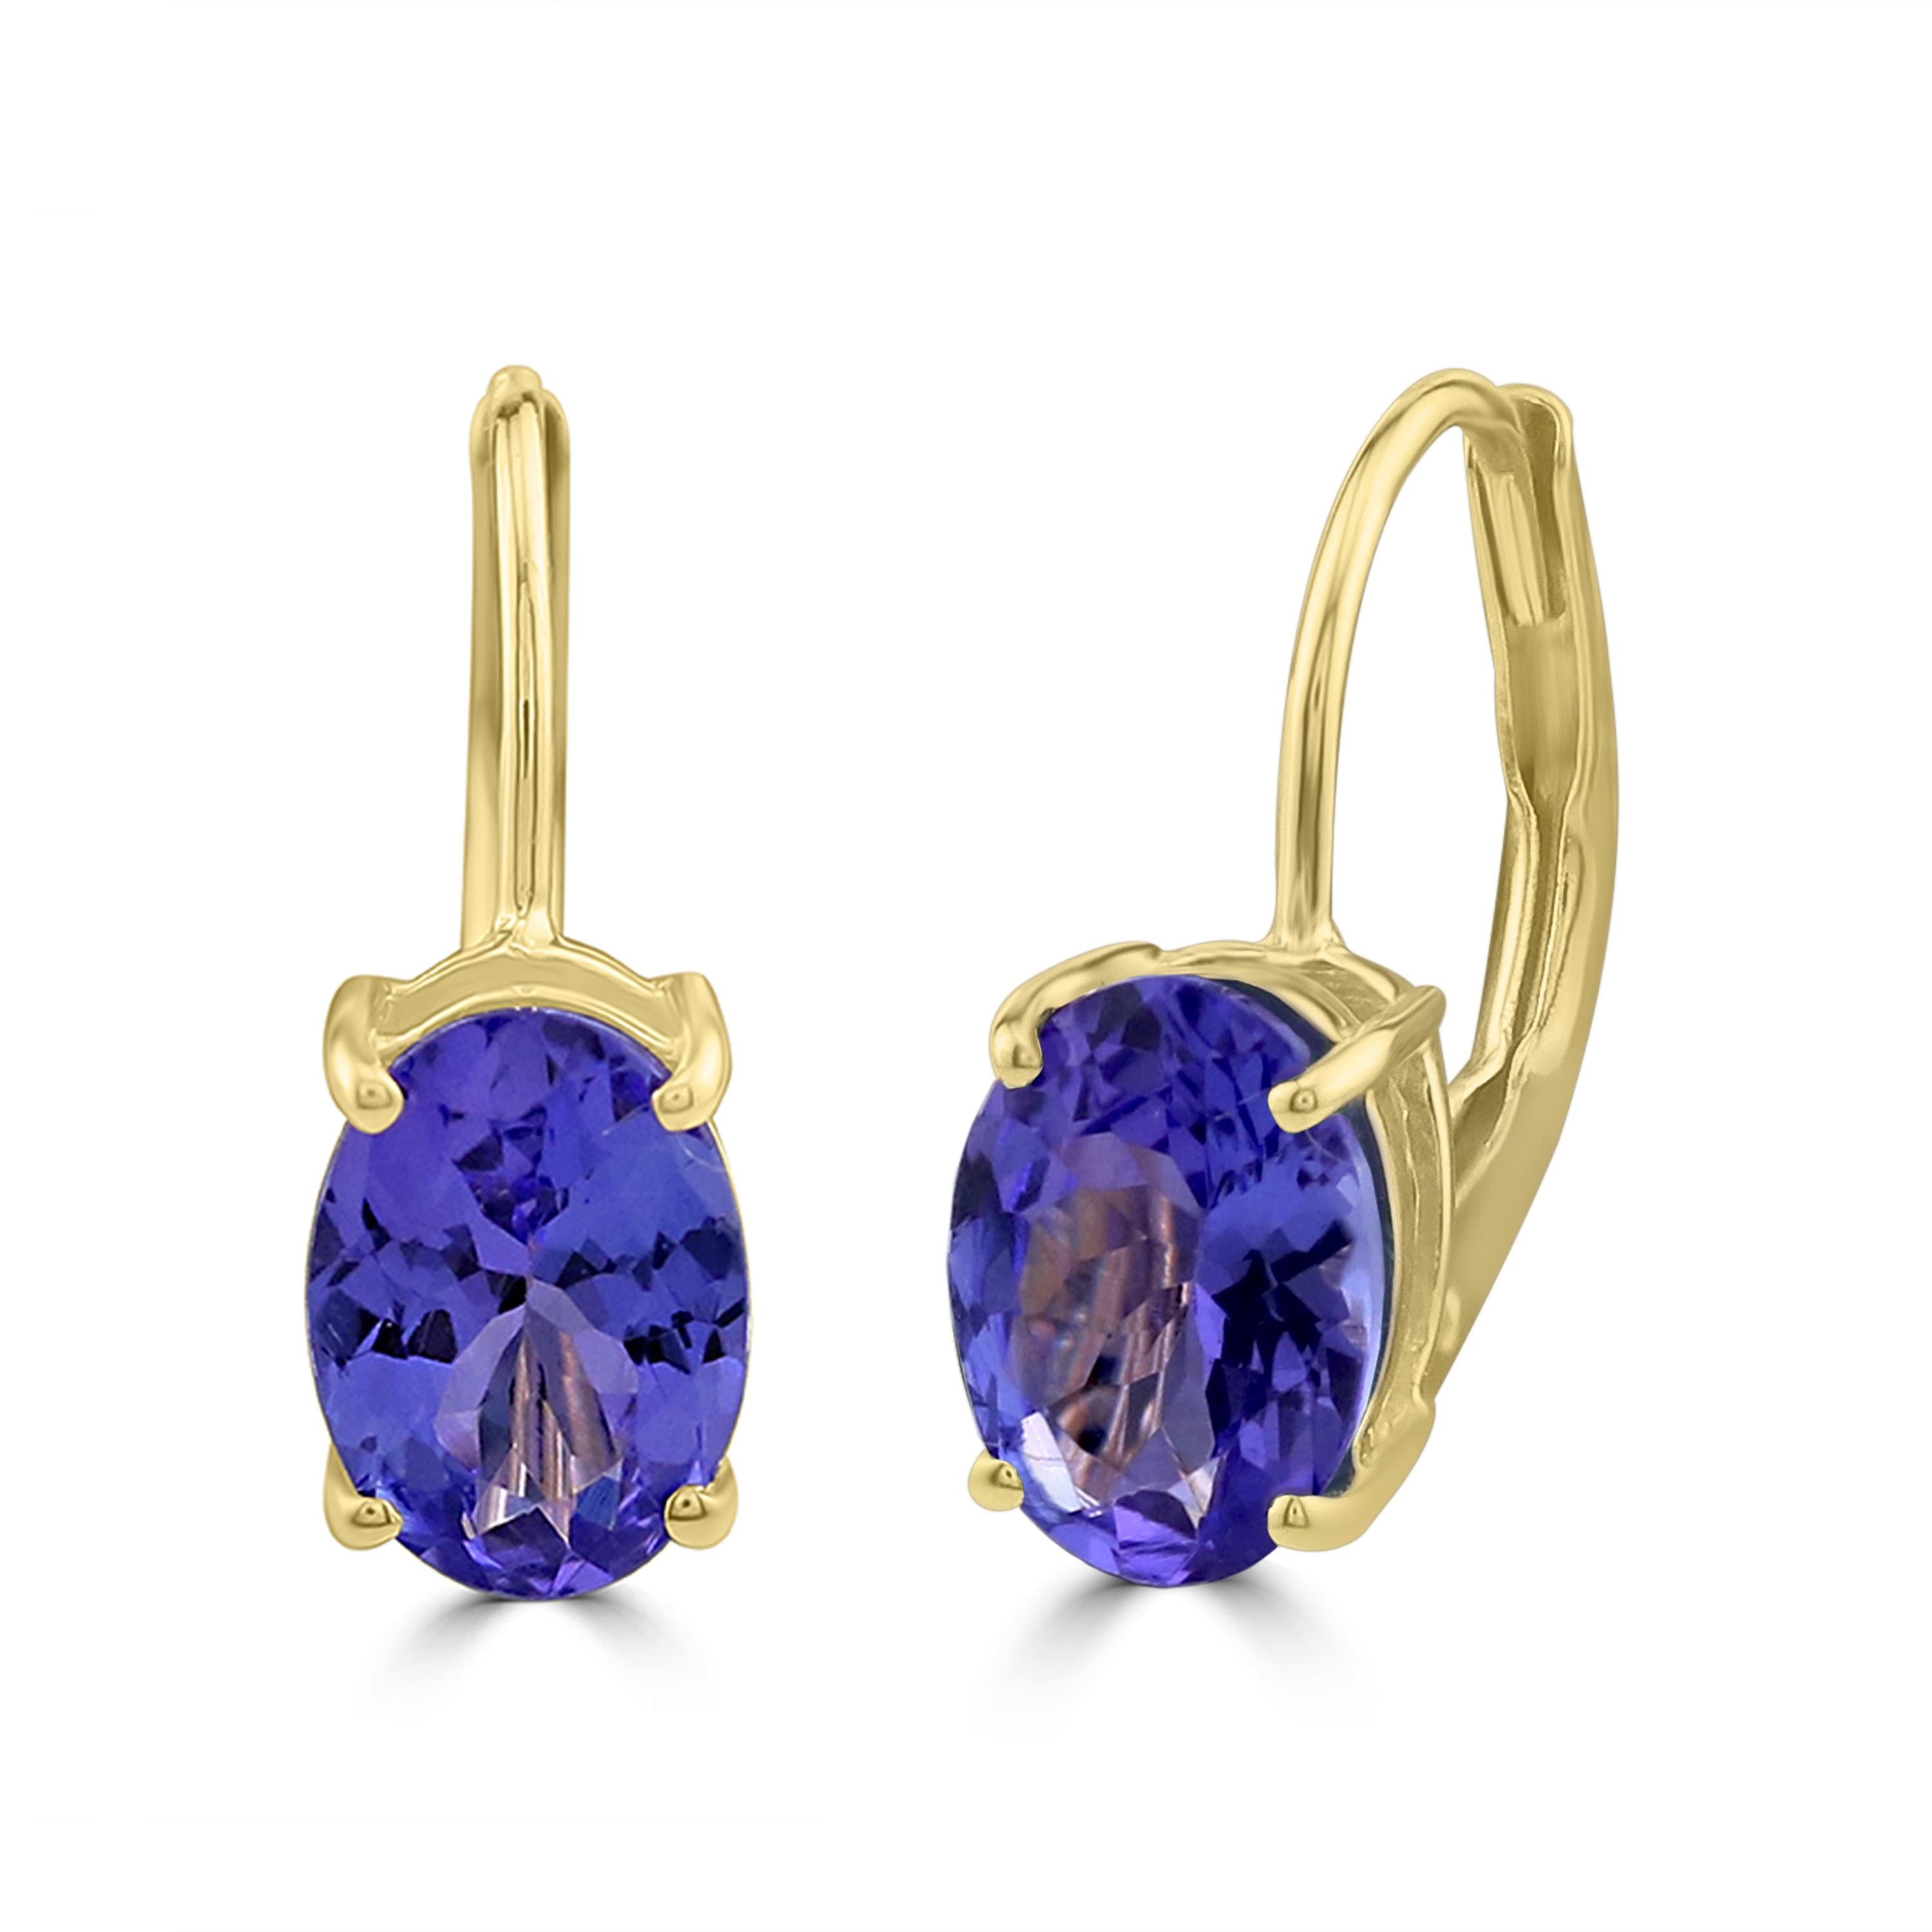 Bask in the purple glow of these beautiful Gemistry drop earrings. This pair of 1.46 ct. t.w. tanzanite 7*5mm drops are prong set in polished 14k yellow gold.  Lever back, tanzanite drop earrings.

Please follow the Luxury Jewels storefront to view